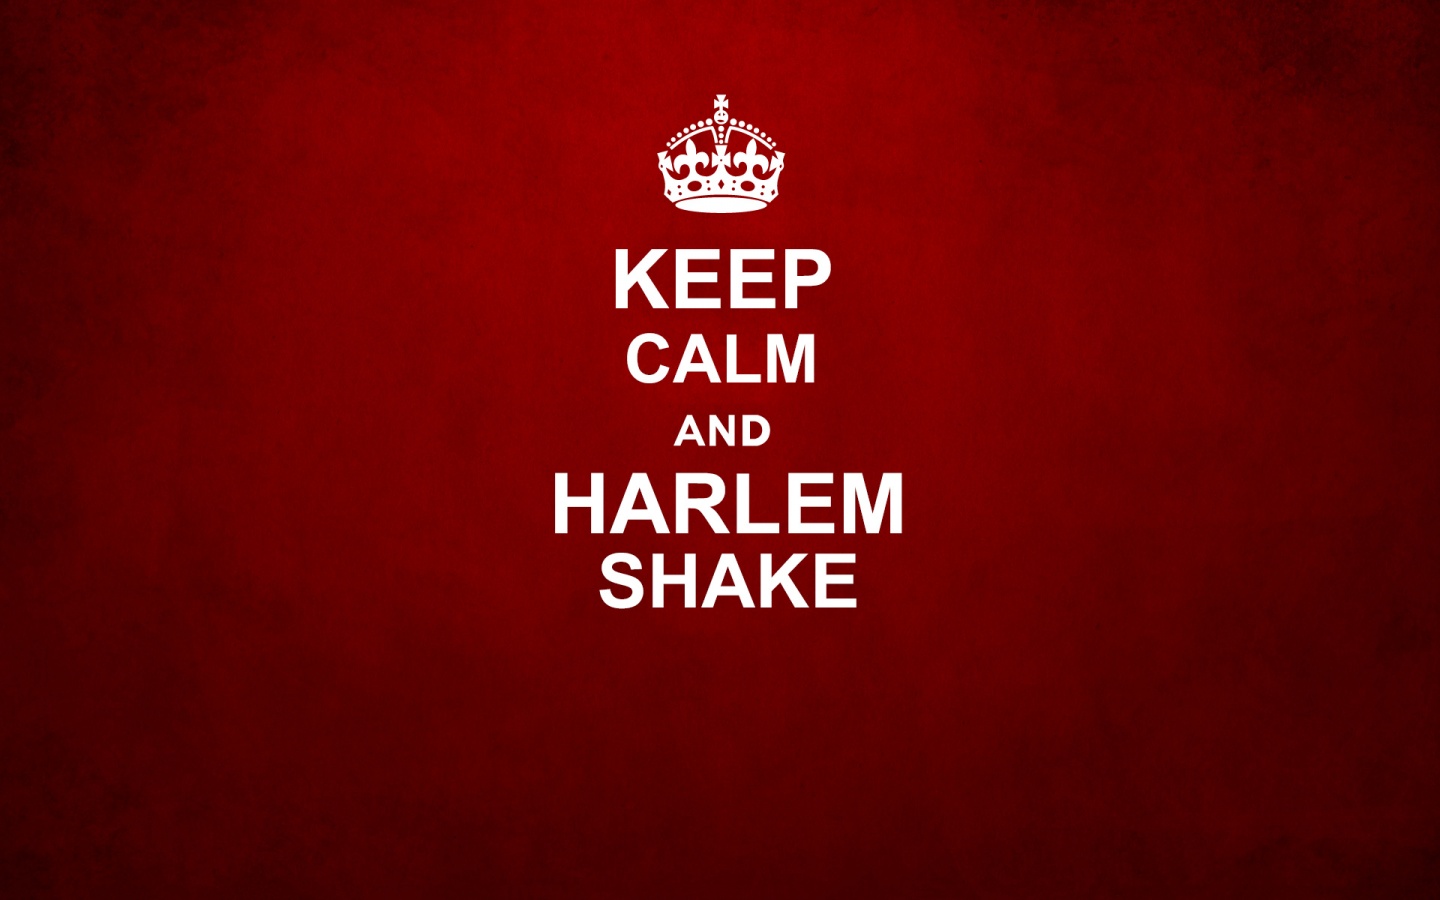 Download Keep Calm and Harlem Shake Wallpaper in 1440x900 Resolution